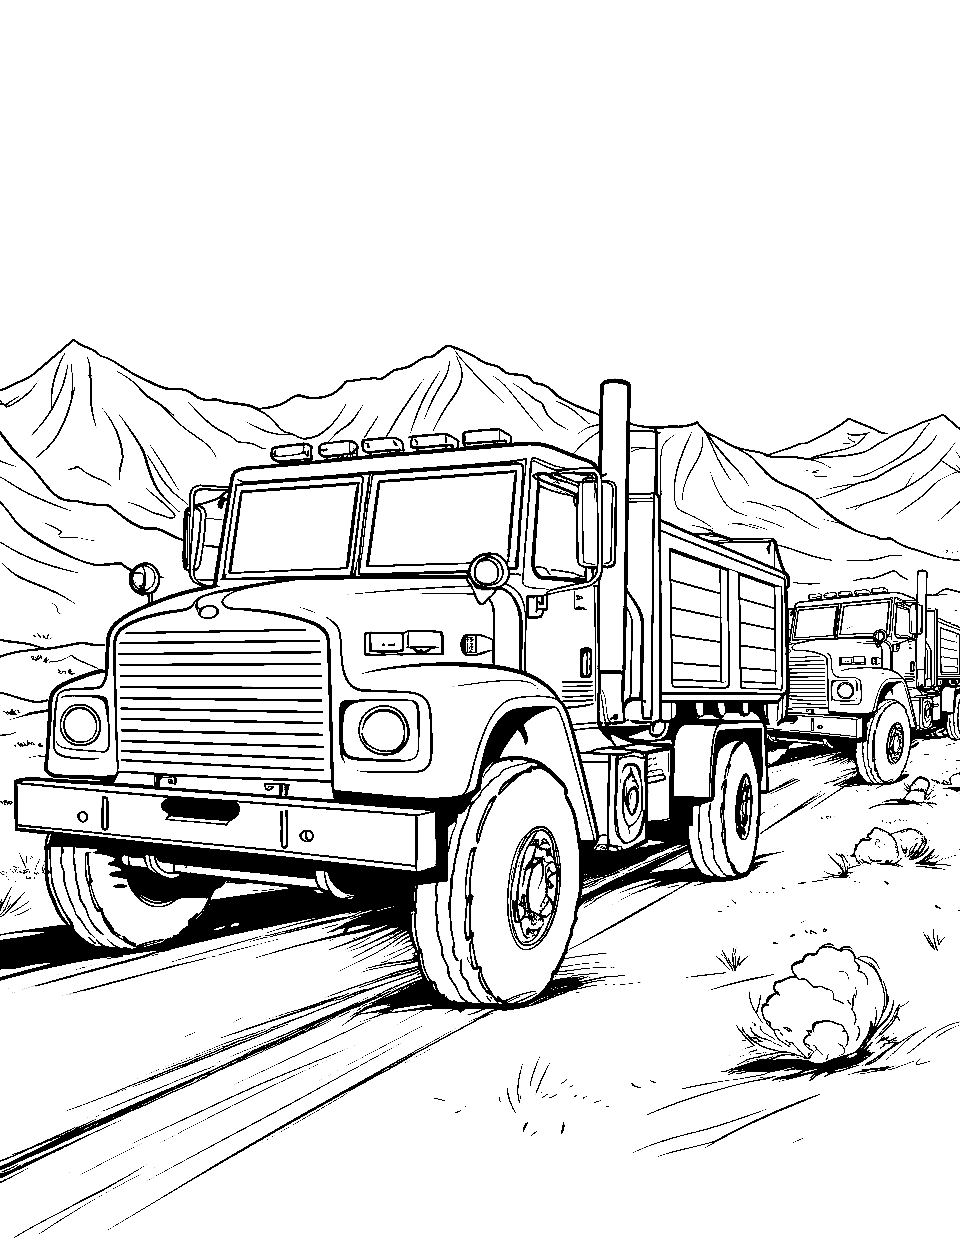 Army Convoy in the Desert Coloring Page - An army truck leading a simple convoy through a sandy desert.